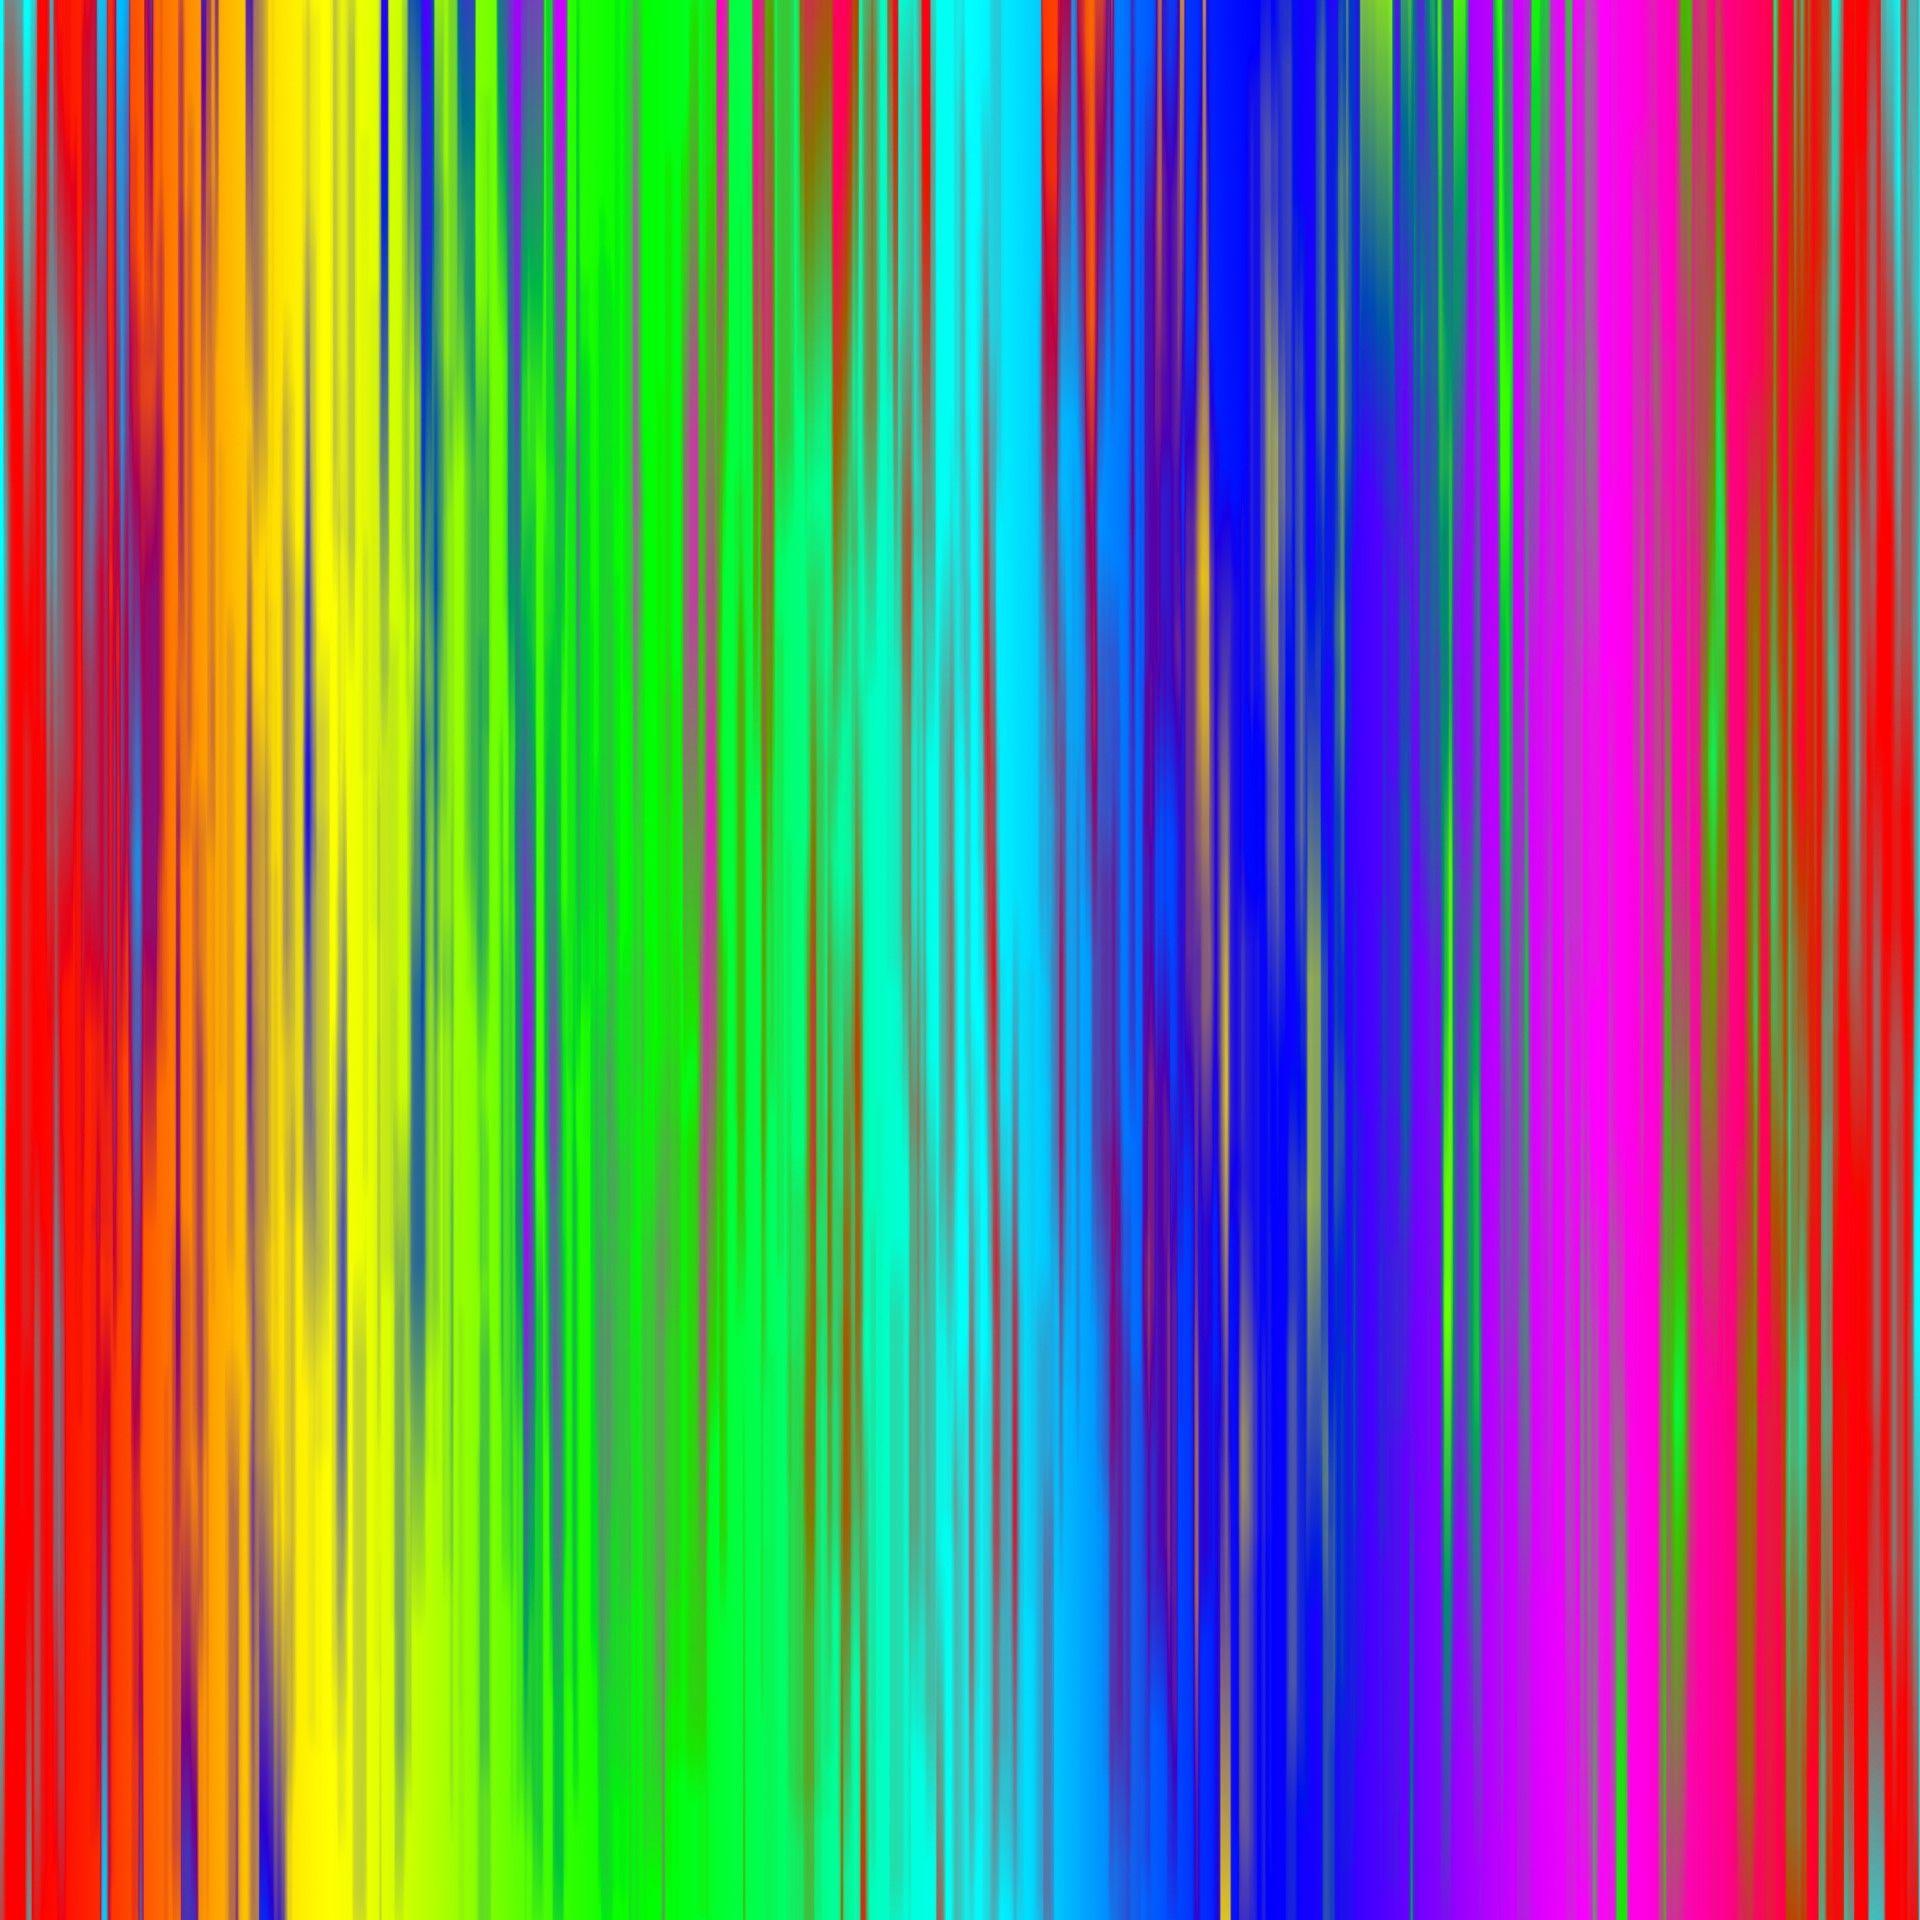 Rainbow Stripes Wallpapers - Top Free Rainbow Stripes Backgrounds ...